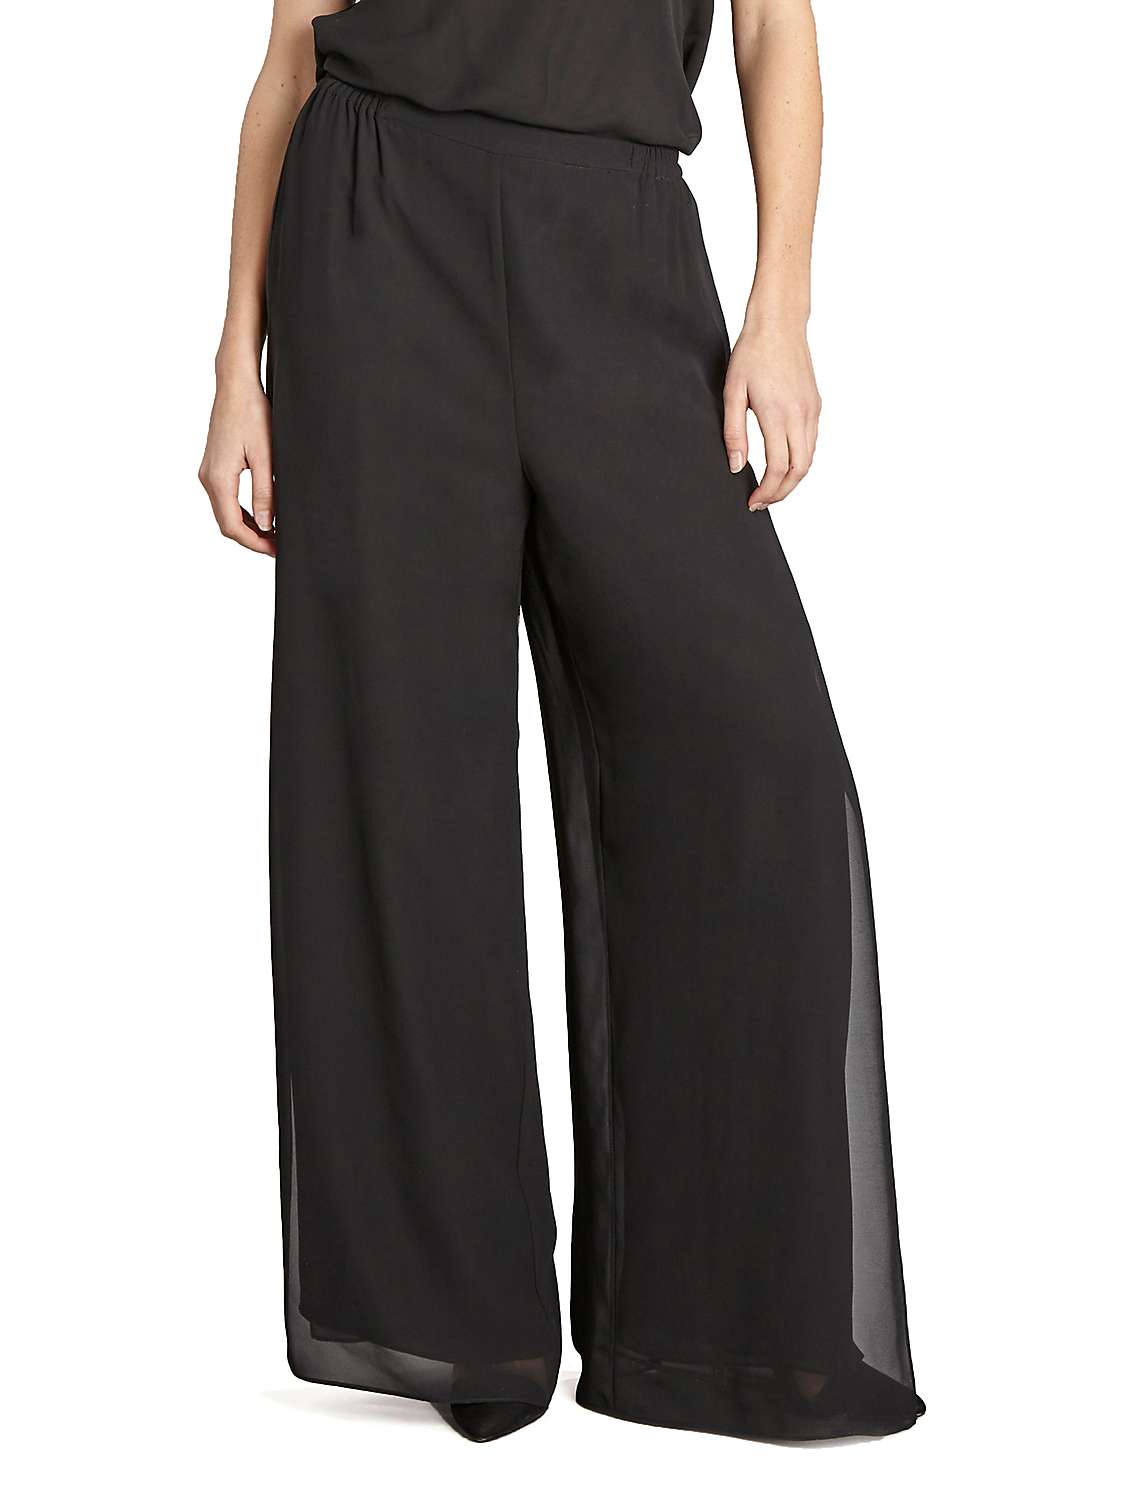 Buy Gina Bacconi Chiffon Layered Trousers With Slits Online at johnlewis.com